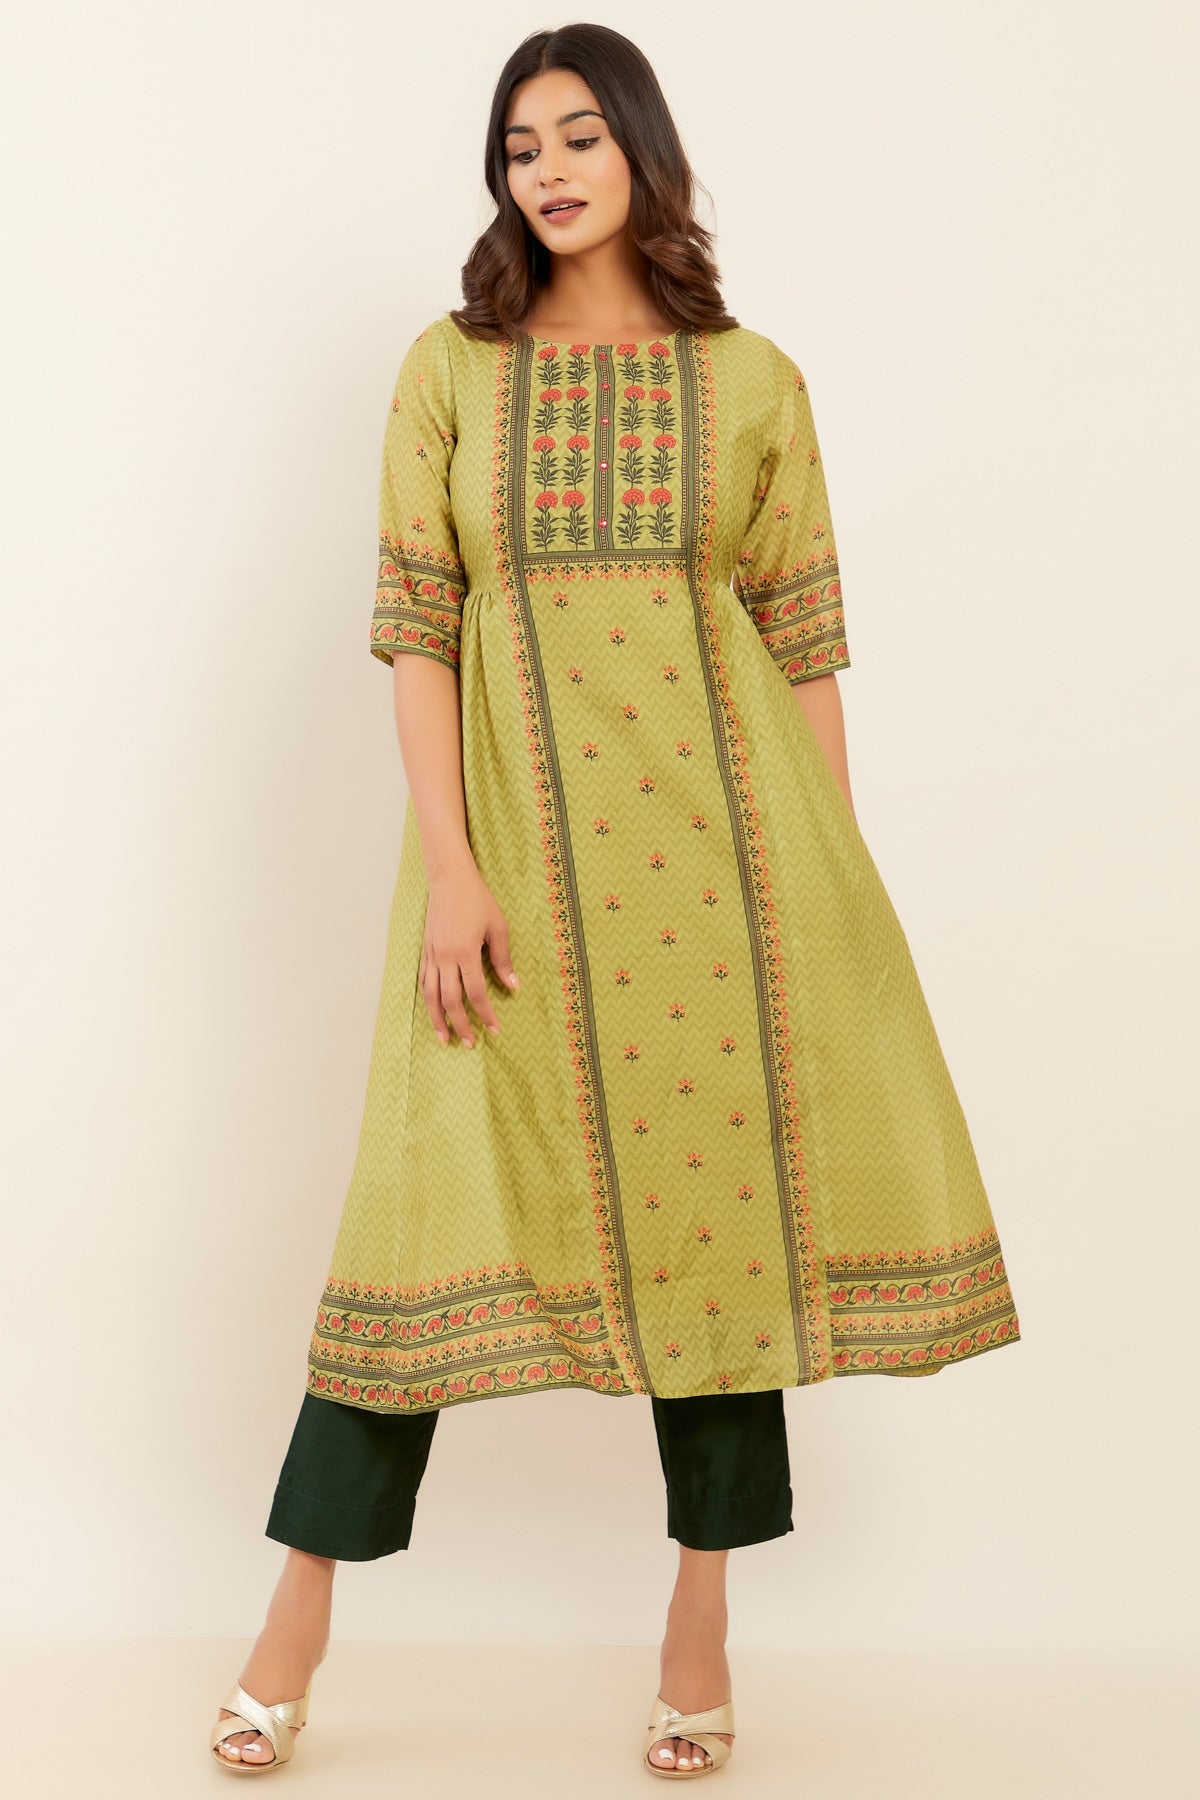 All Over Geometric & Floral Printed A-Line Pleated Kurta - Green